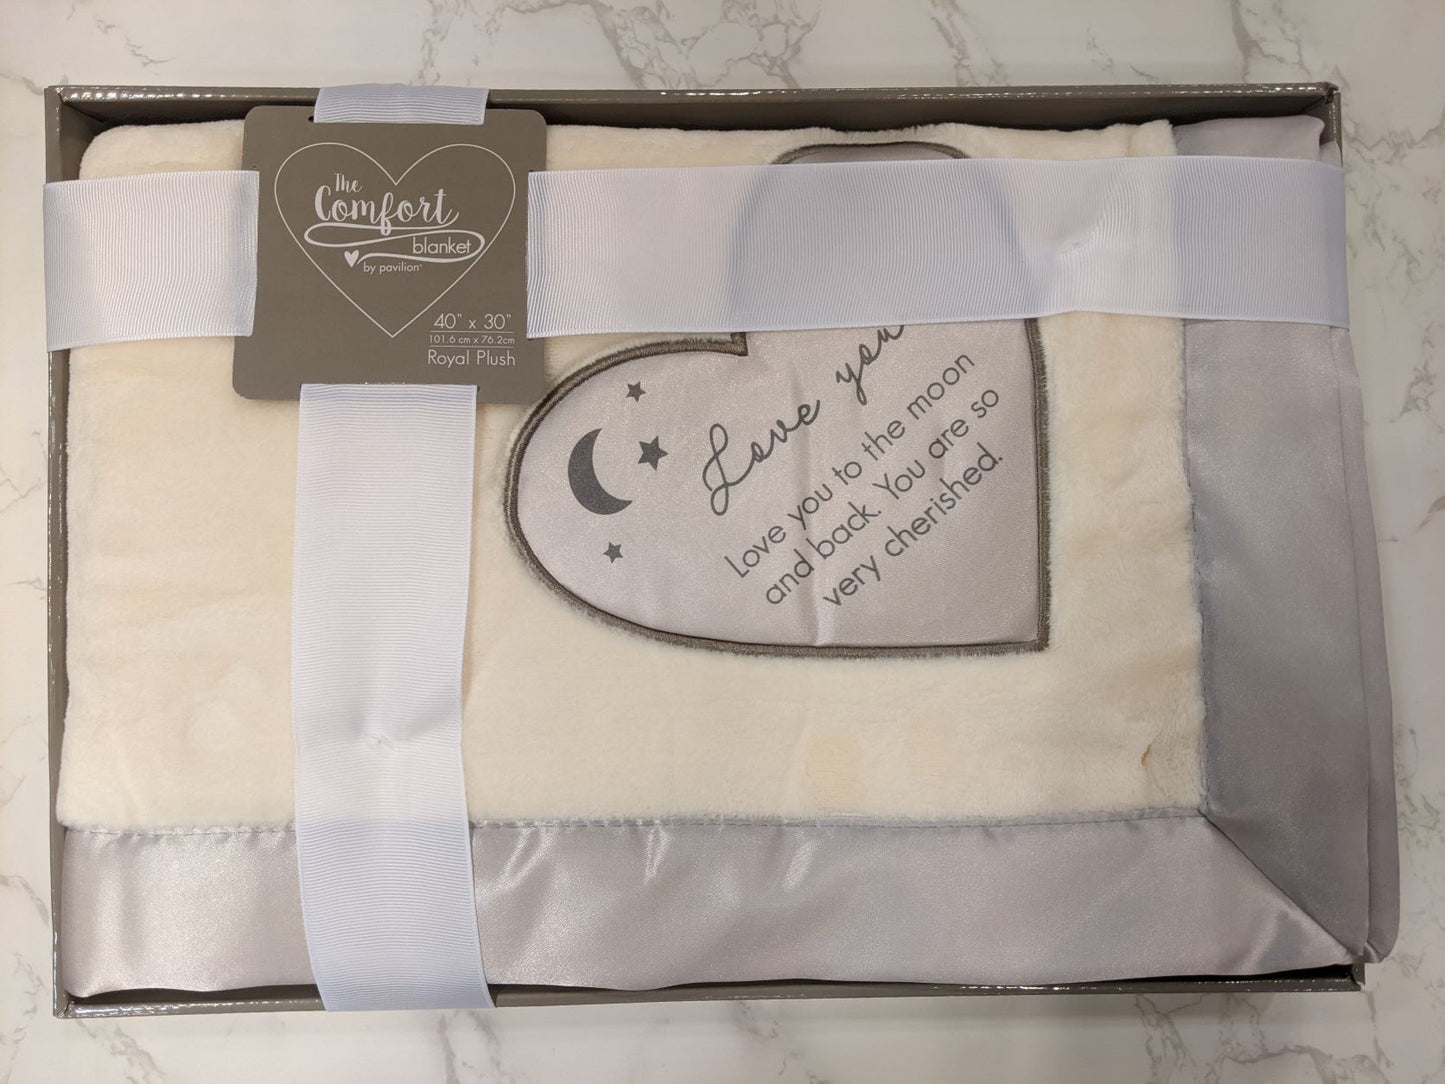 30" x 40" Royal plush blanket, packaged in a ribbon-wrapped open-faced box,  features silk heart detail and edging.  This text is printed onto embroidered heart the "Love You To The Moon And Back. You Are So Cherished" Neutral beige color.  A great gift to  welcome to the newborn baby to the family or for another loved one.